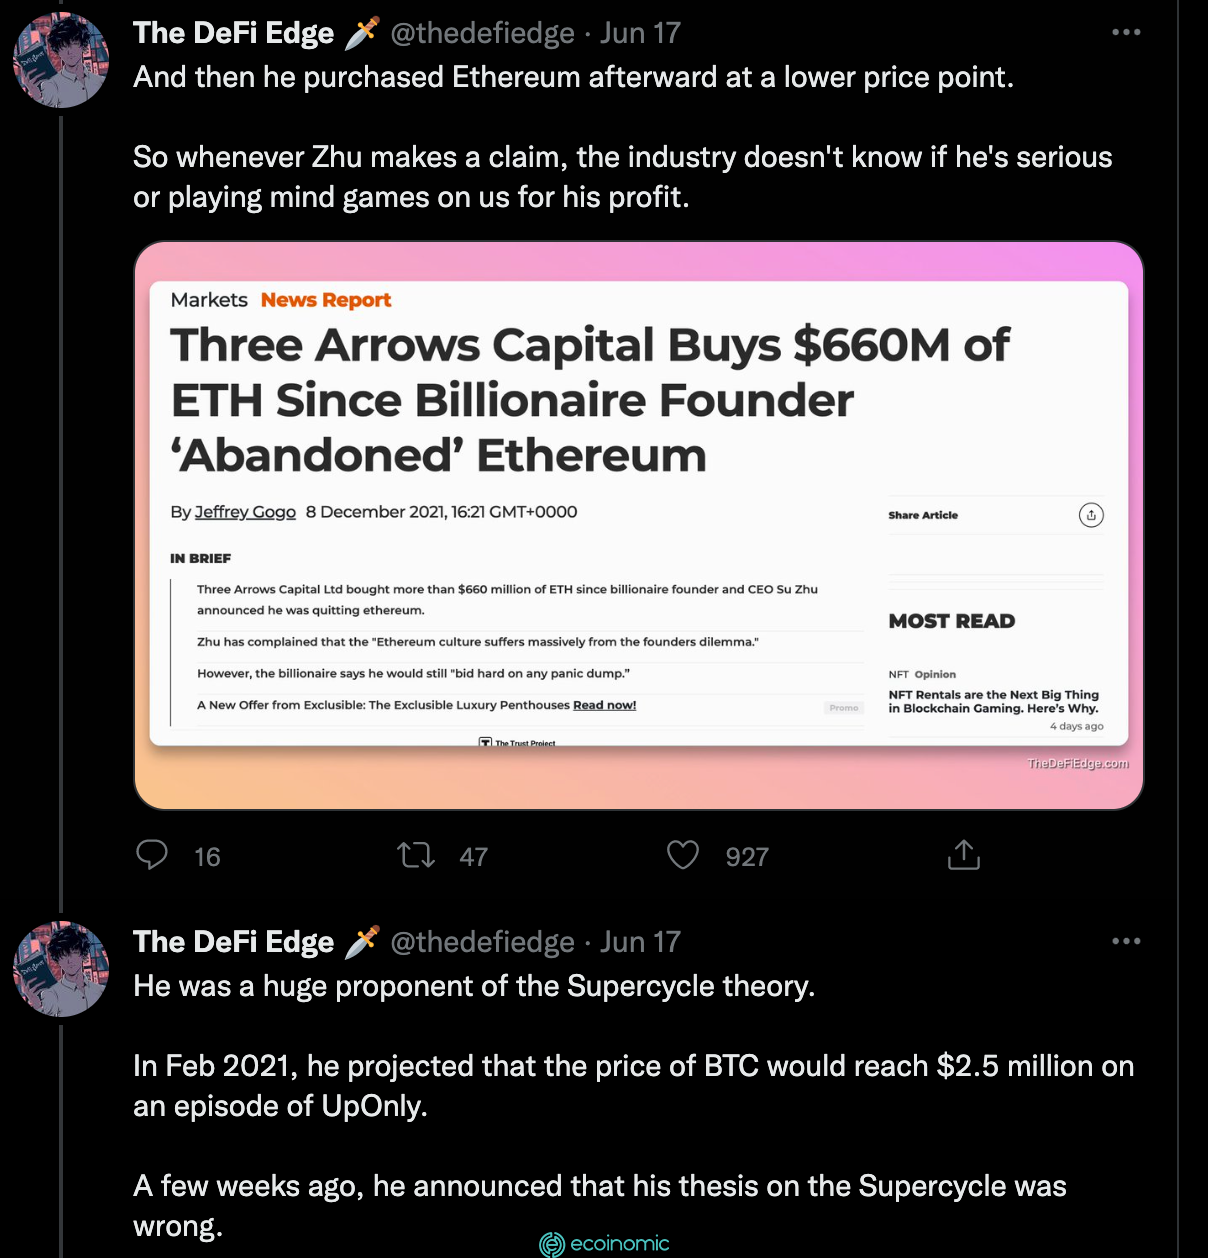 Founder of 3AC - Zhu once posted a FUD ETH tweet and then purchased eth